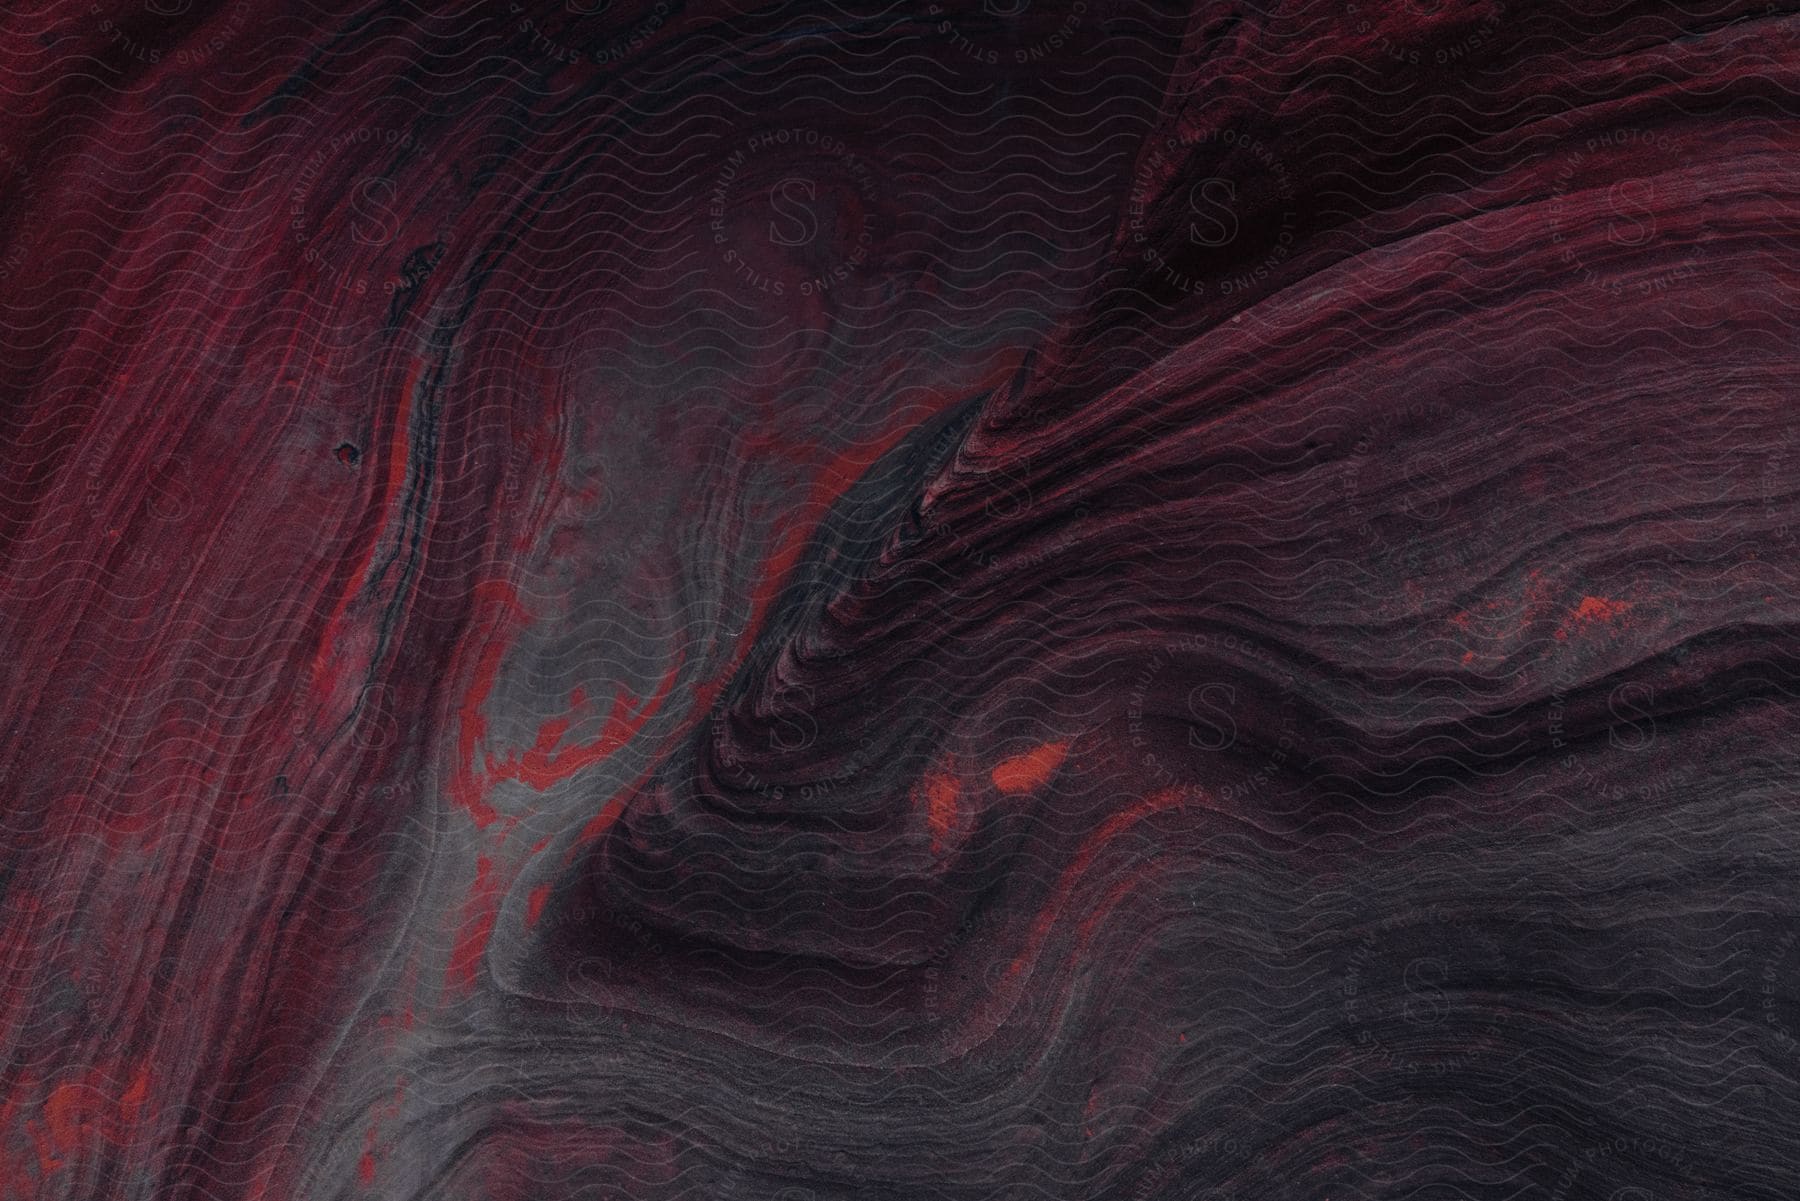 Deep red and grey lines and patterns resembling the lines on a topographical map